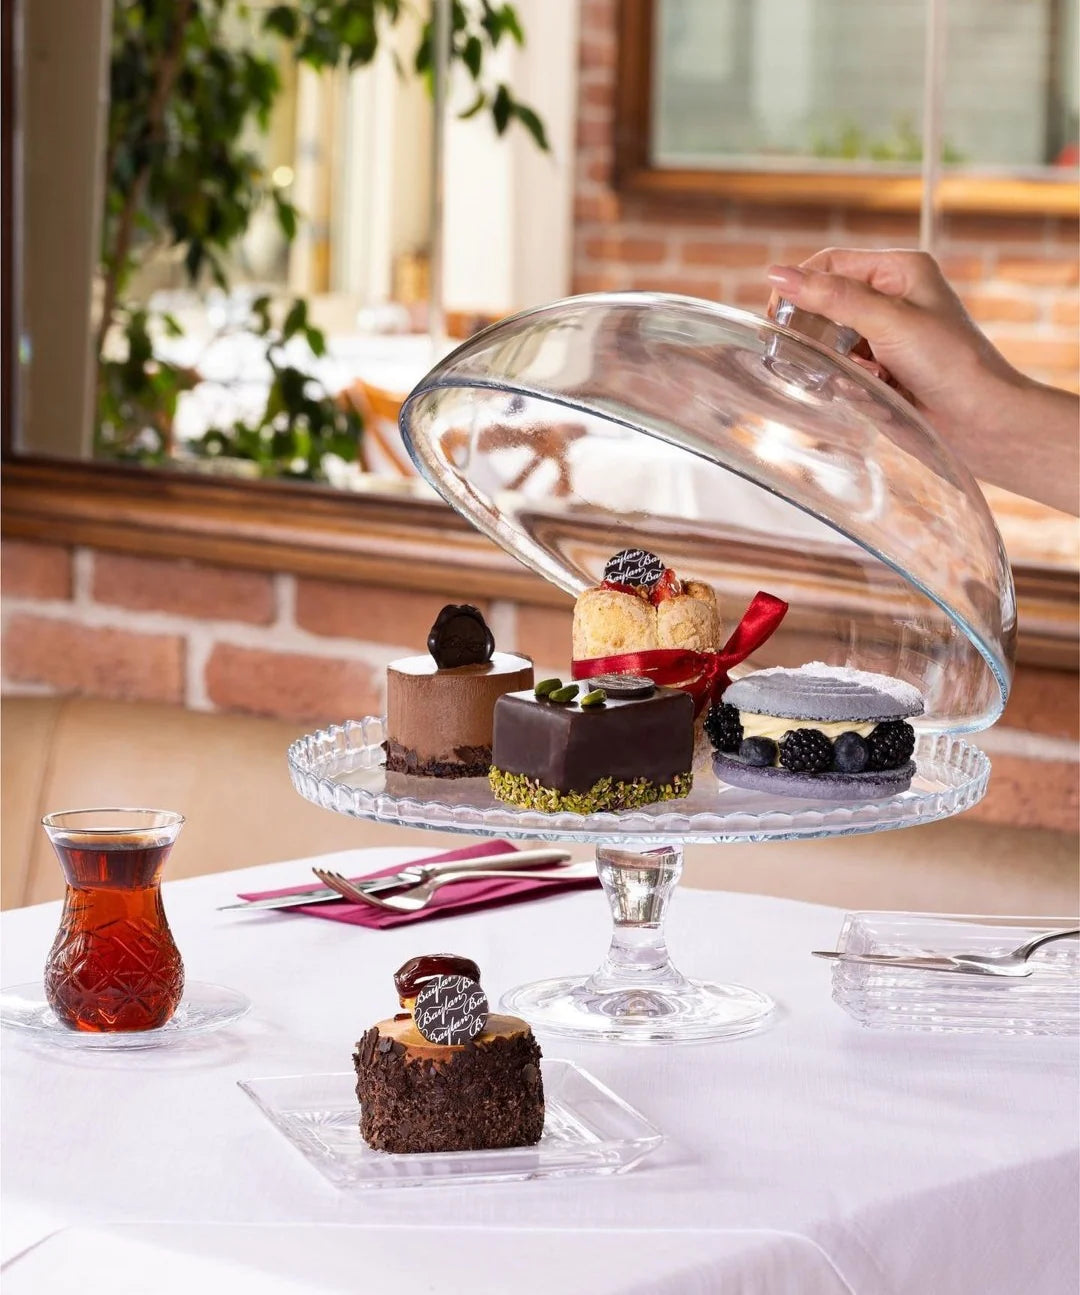 Pasabahce Patisserie Cake Dome + Service Plate - 95200